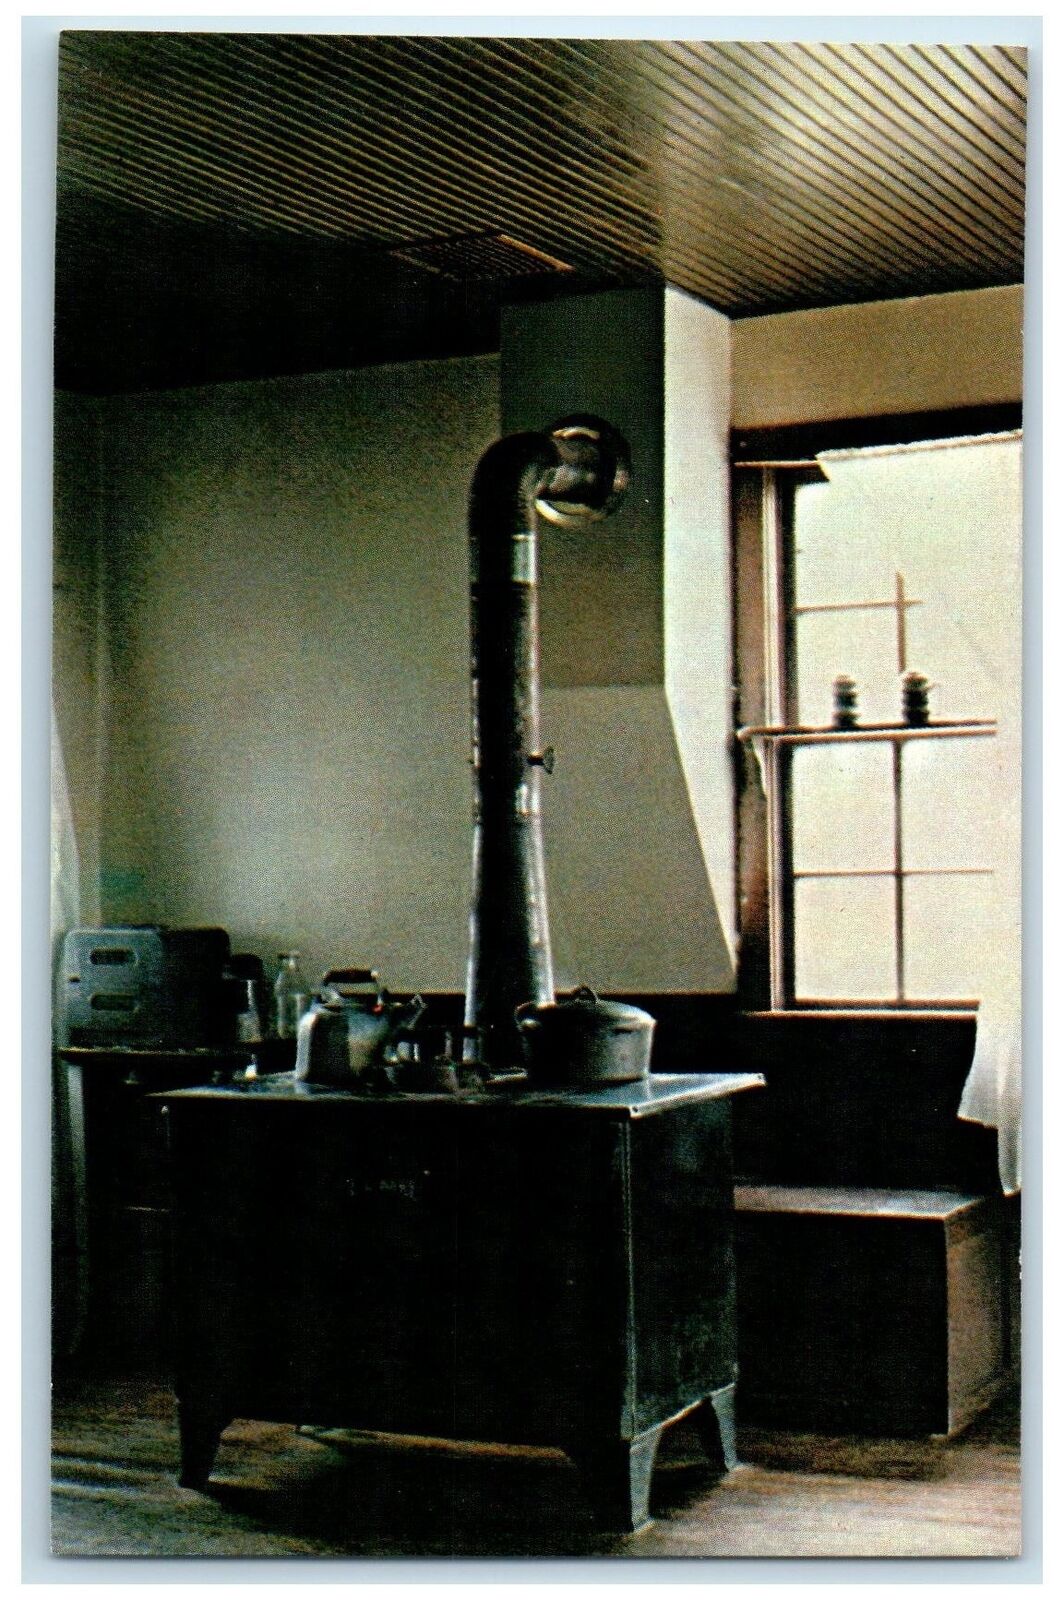 c1960s Stove And Oven In Kitchen Of Plain Amish Home Amishville Indiana Postcard